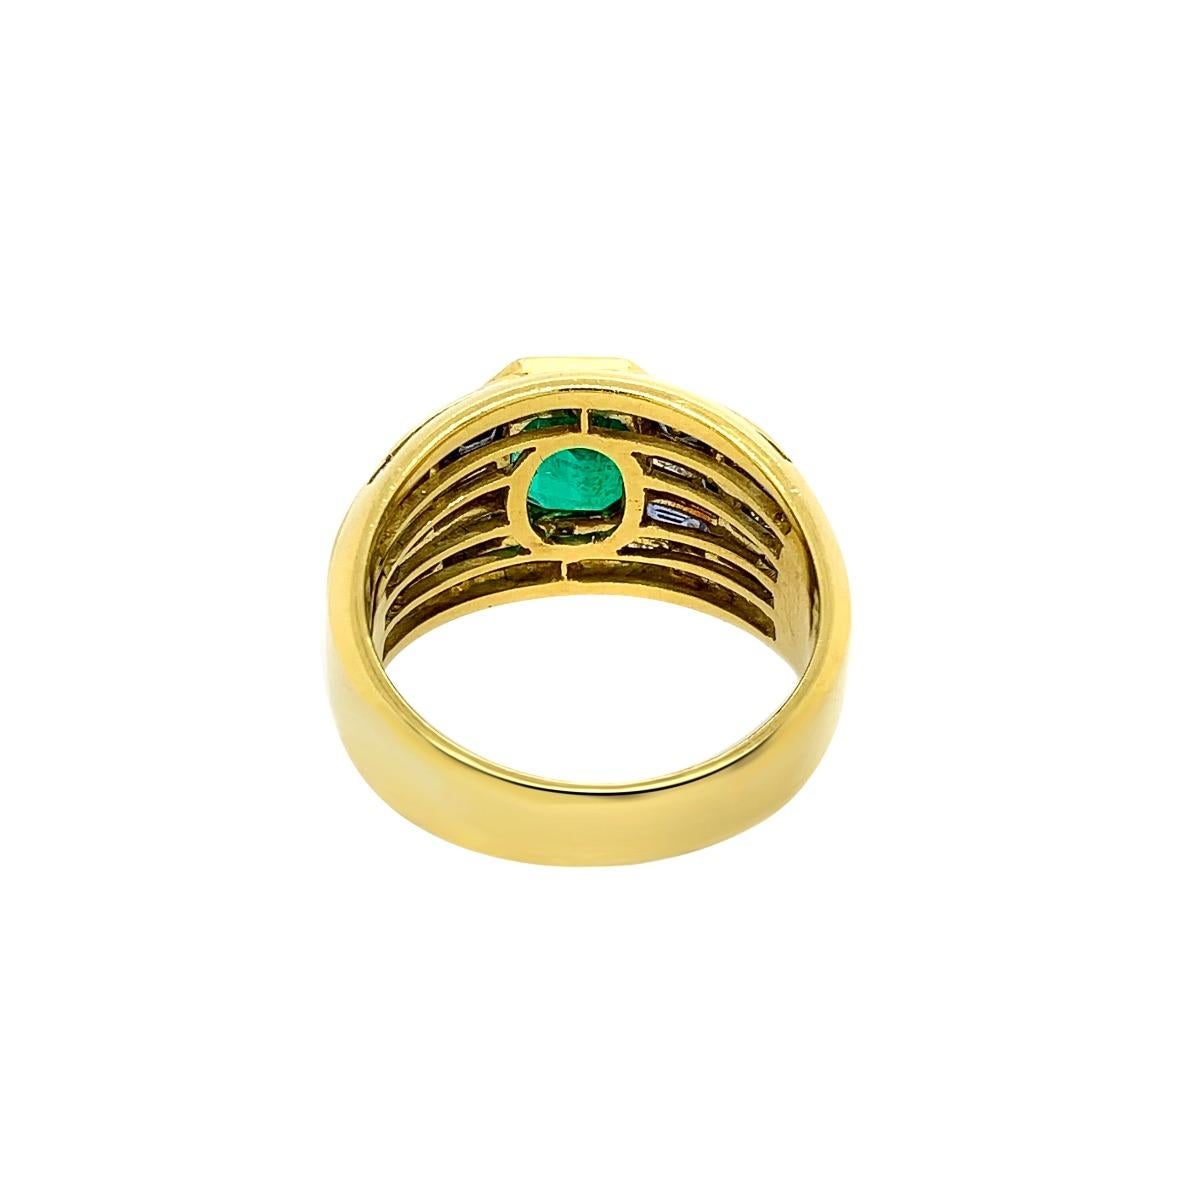 Metal: 18k Yellow Gold
Condition: Excellent
Ring Size: 6.5
Gemstone: Diamond, Sapphire & Emerald( COLOMBIAN)
Emerald Weight: 1.5 CT
Emerald Color: green, Very translucent
Baguette Cut Diamond : Approx 1CT
Sapphire Weight: 0.50 CT
Total Item Weight: